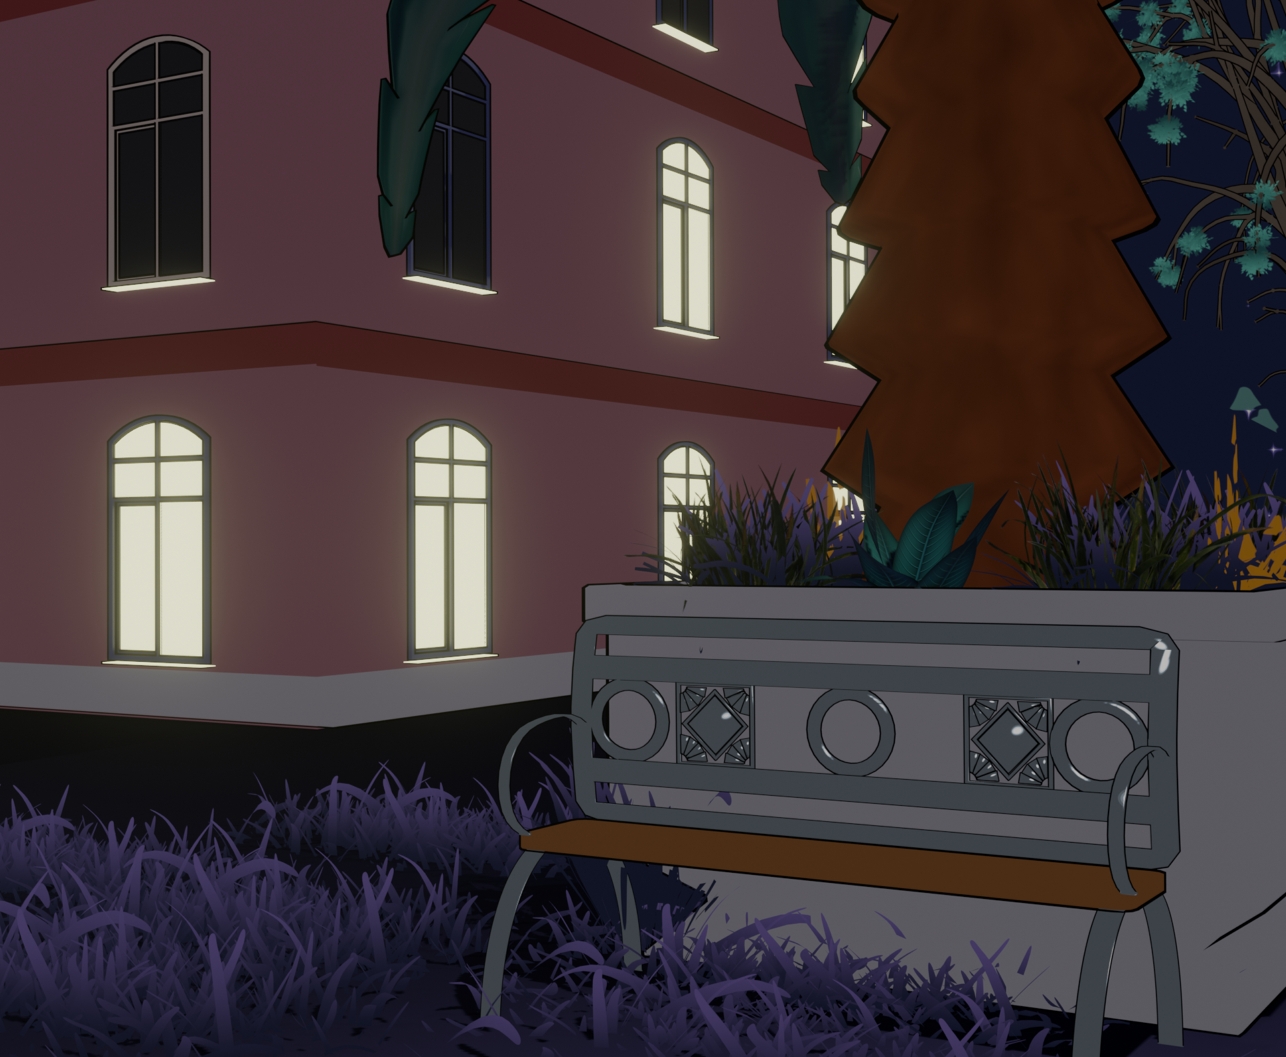 Image description: The full version of the background that was used in the panel featuring Alicia. A large planter with a palm tree surrounded by small plants sits to the side of the hotel. In front of the planter is an Art Deco-style bench.